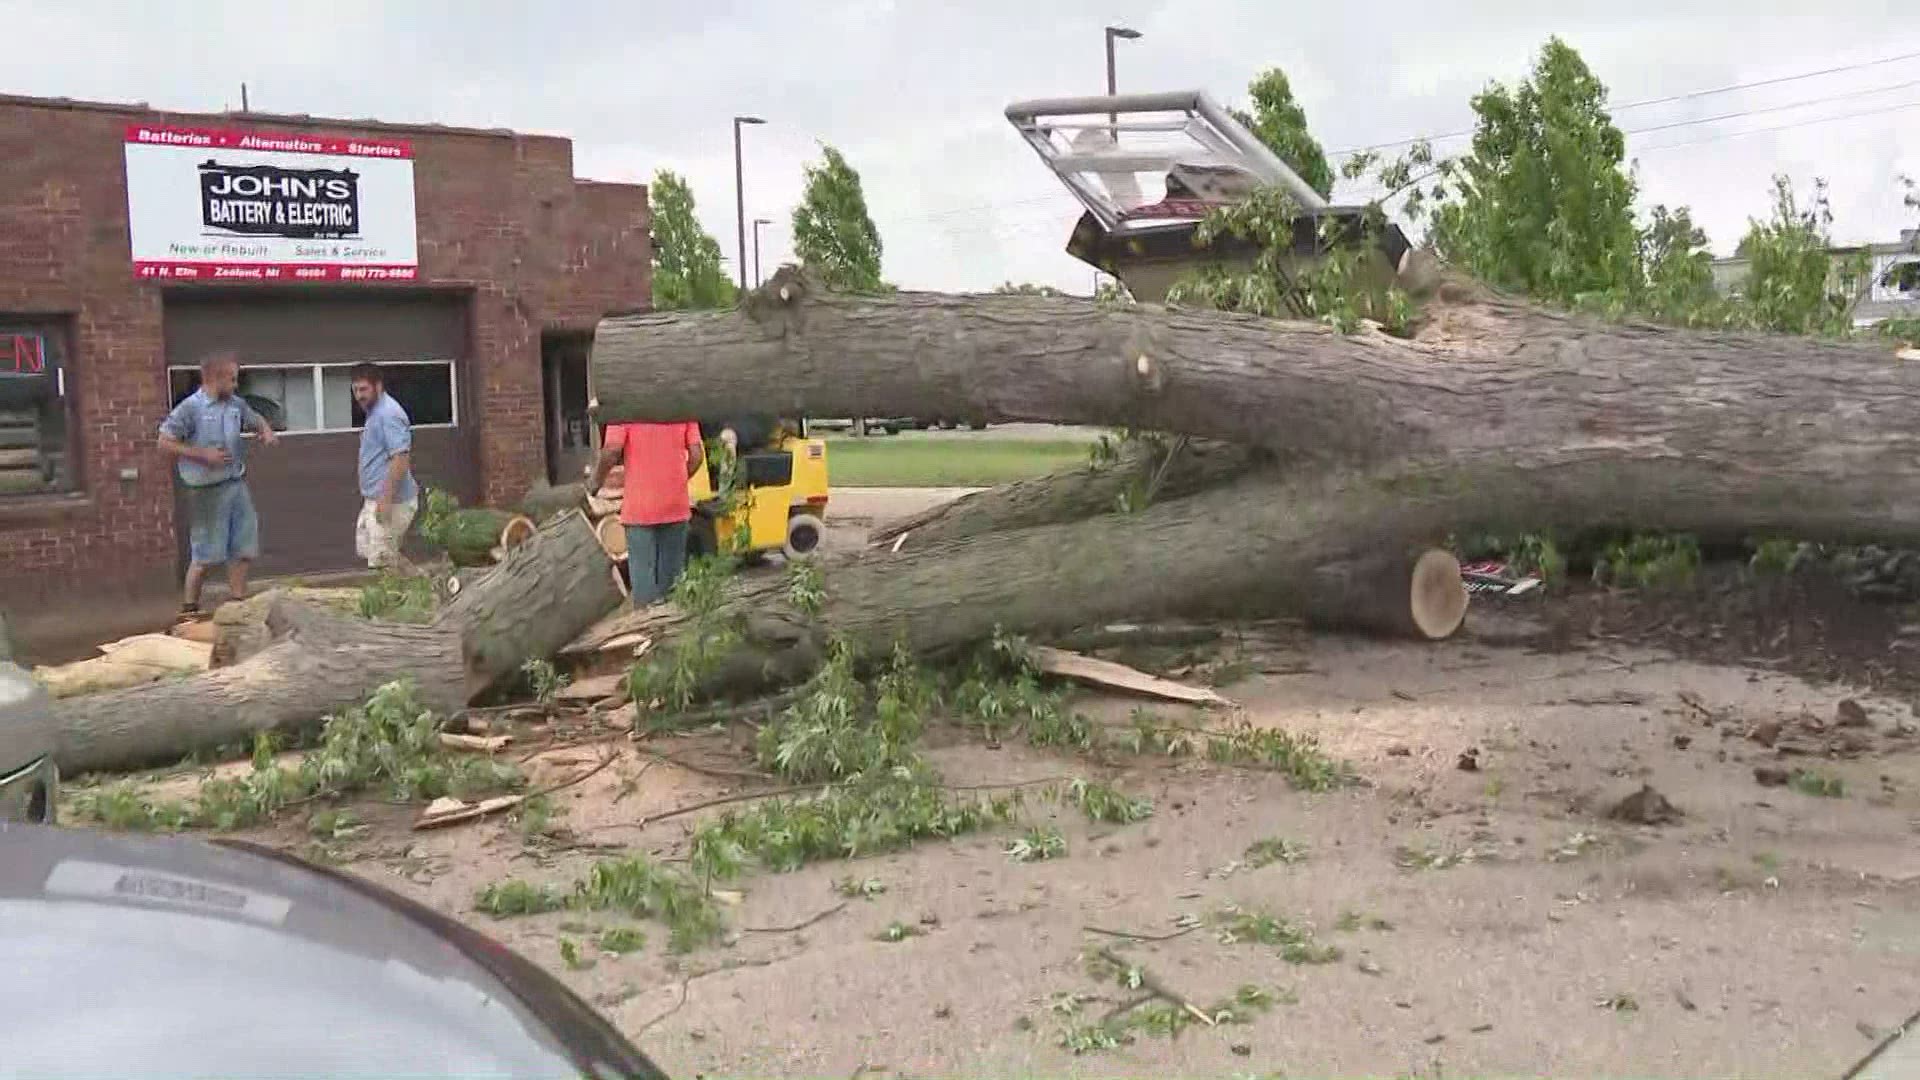 Storms swept through West Michigan last night and today, leaving behind damage.